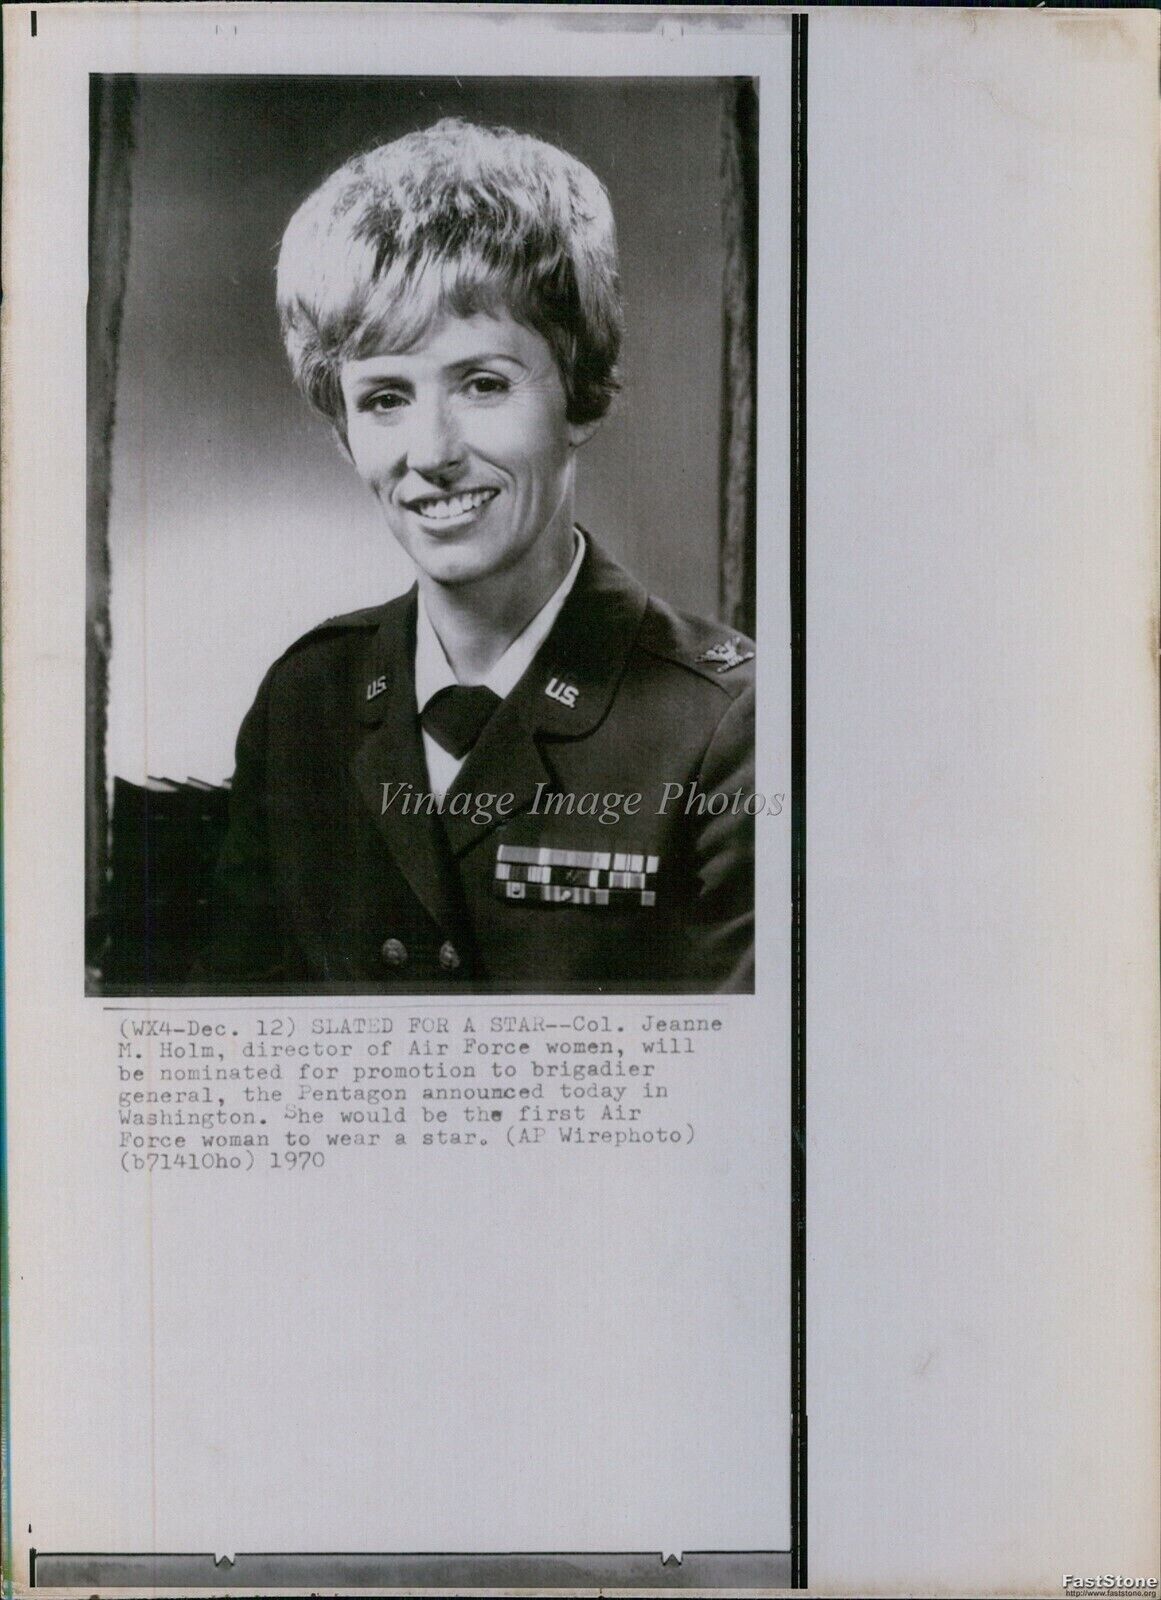 1970 Colonel Jeanne M Holm Promotion Brigadier General Military Wirephoto 8X10